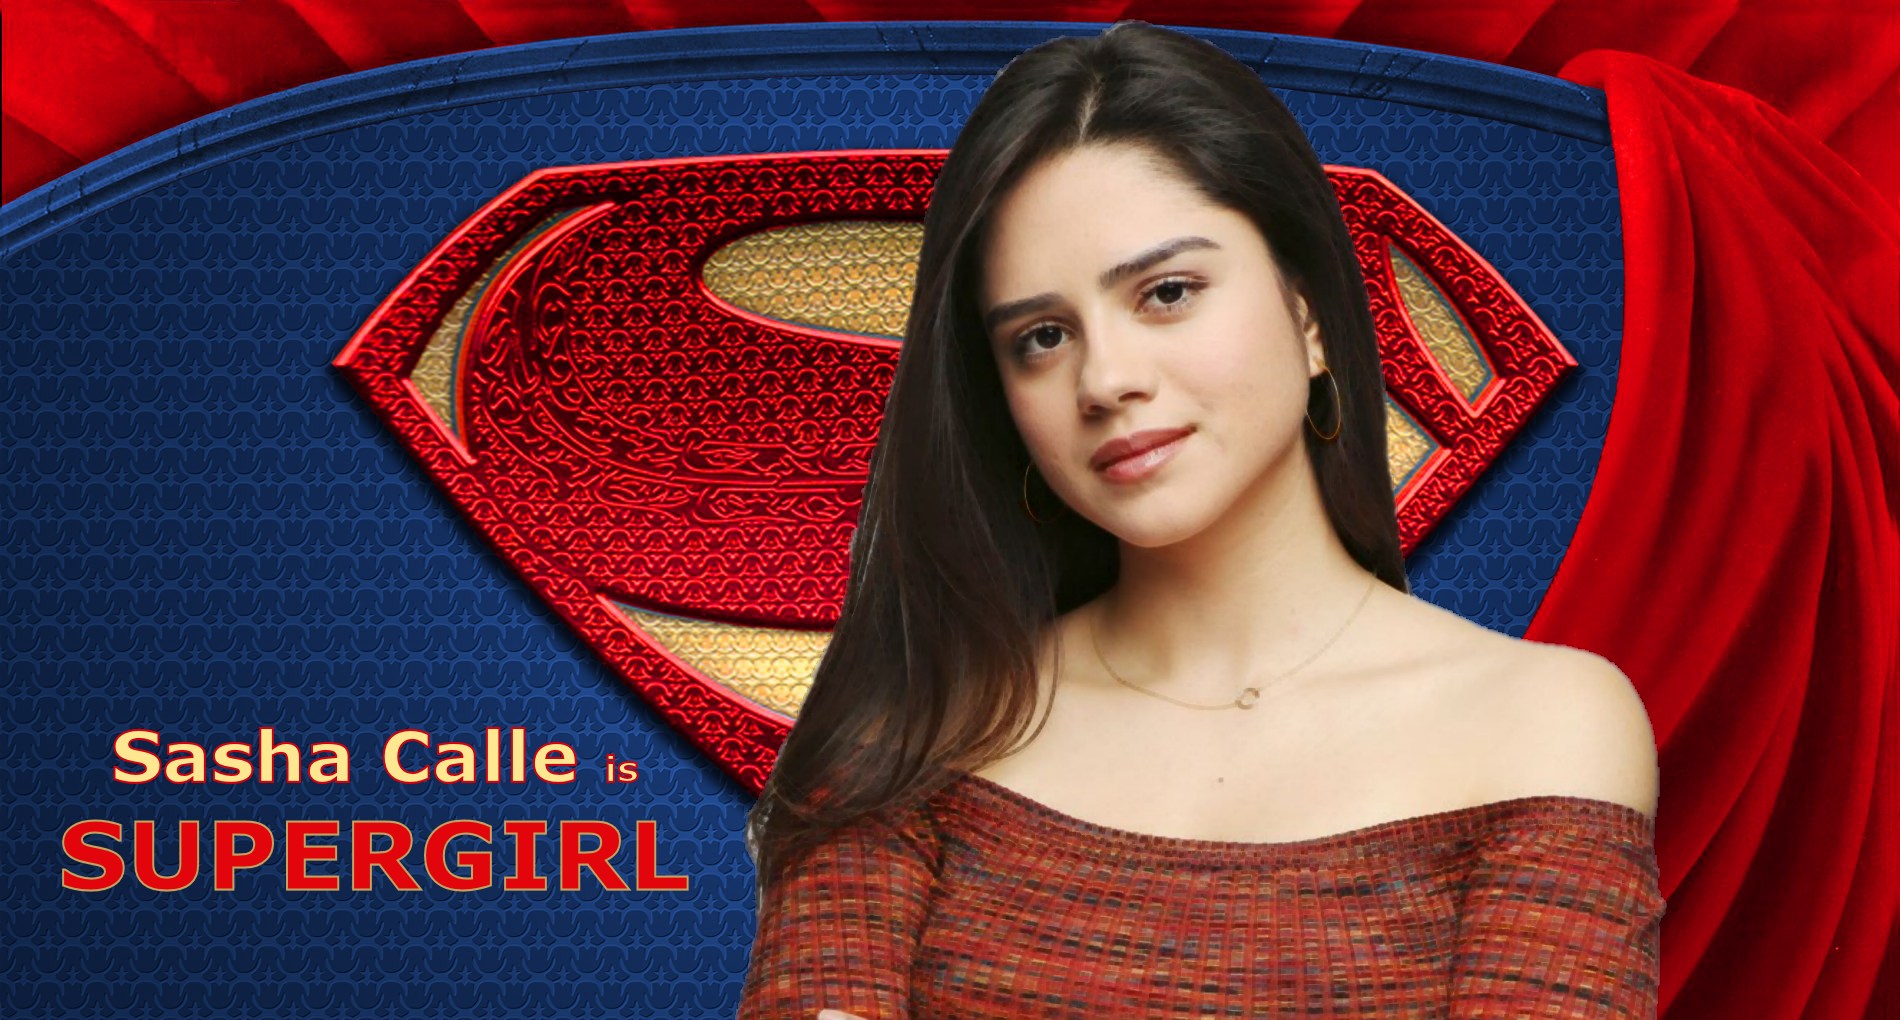 Sasha Calle To Suit Up As Supergirl In 'The Flash' Movie of the Force